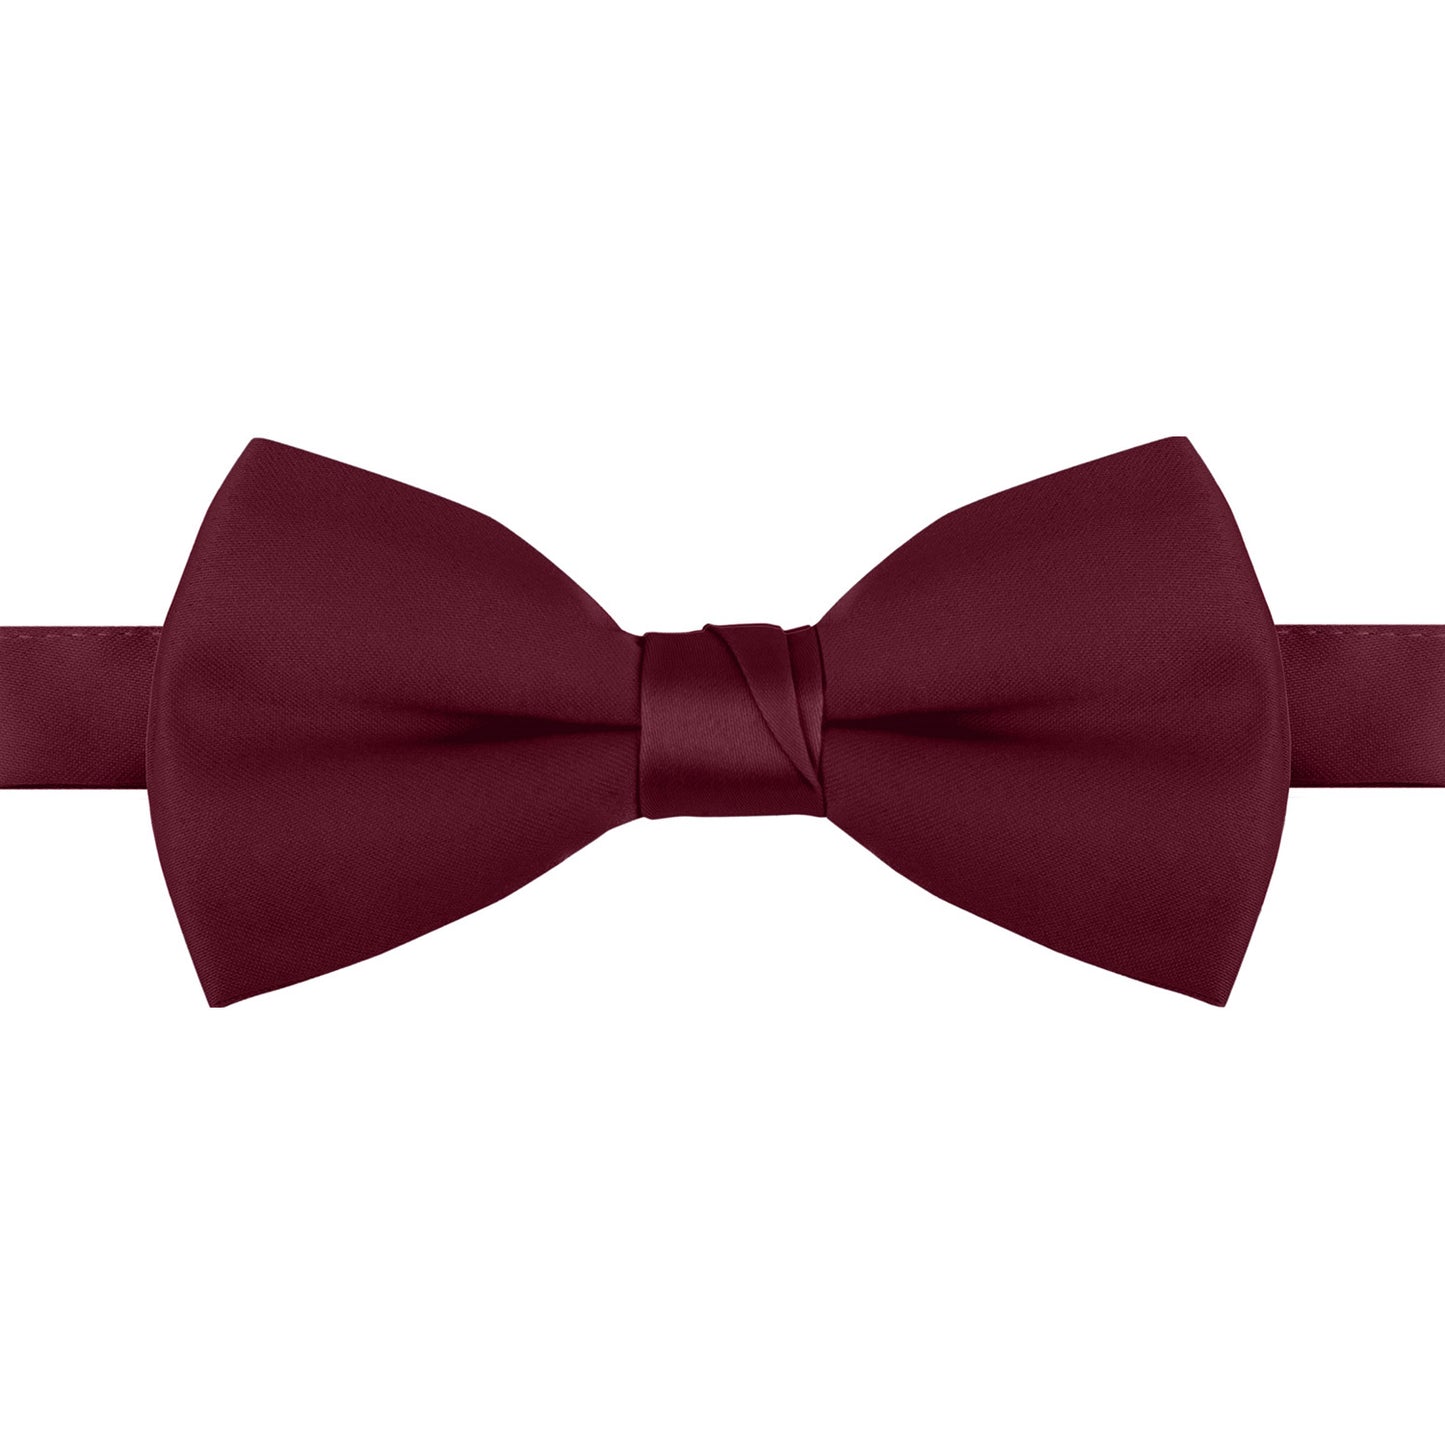 Polyester Satin Bow Tie - Banded or Clip-On - 26 Colors